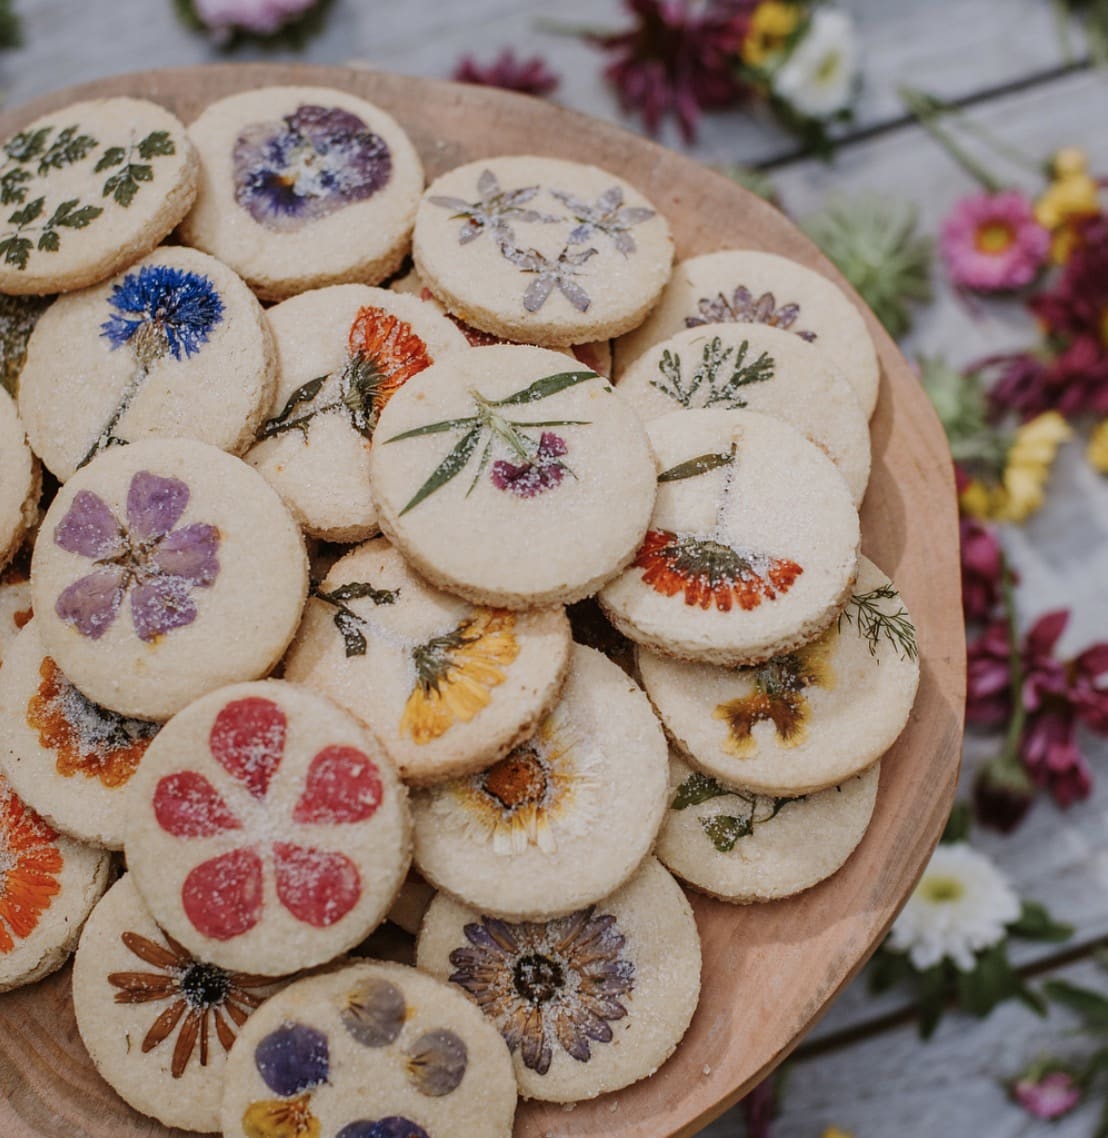 Brightly colored flowers pressed and baked onto sugar cookies on a wooden background.